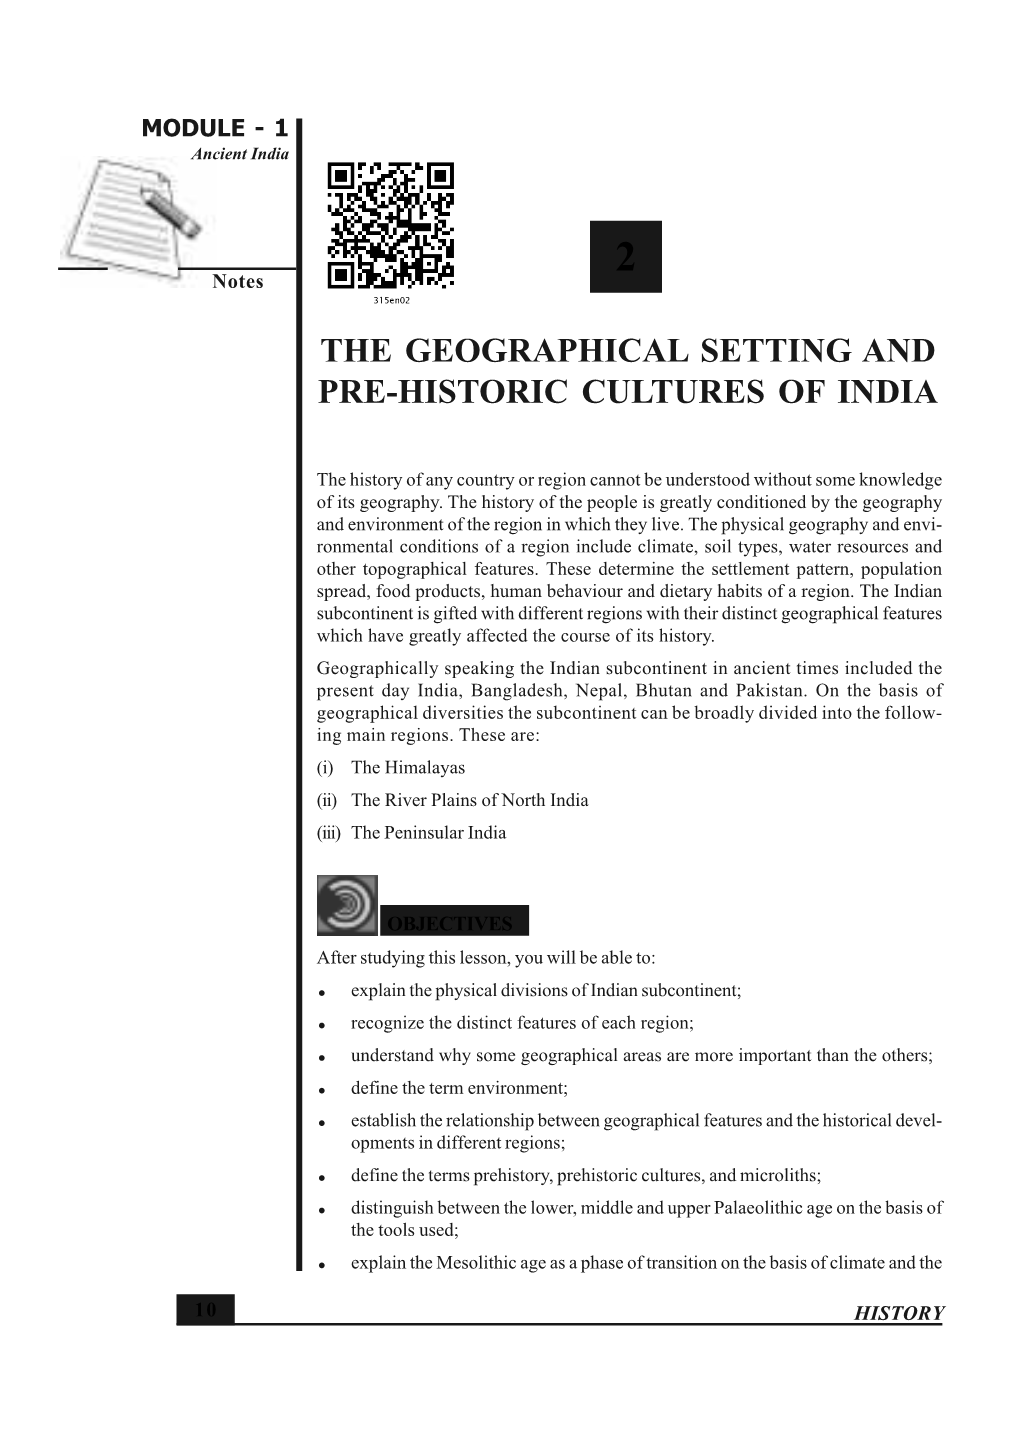 2. the Geographical Setting and Pre-Historic Cultures of India